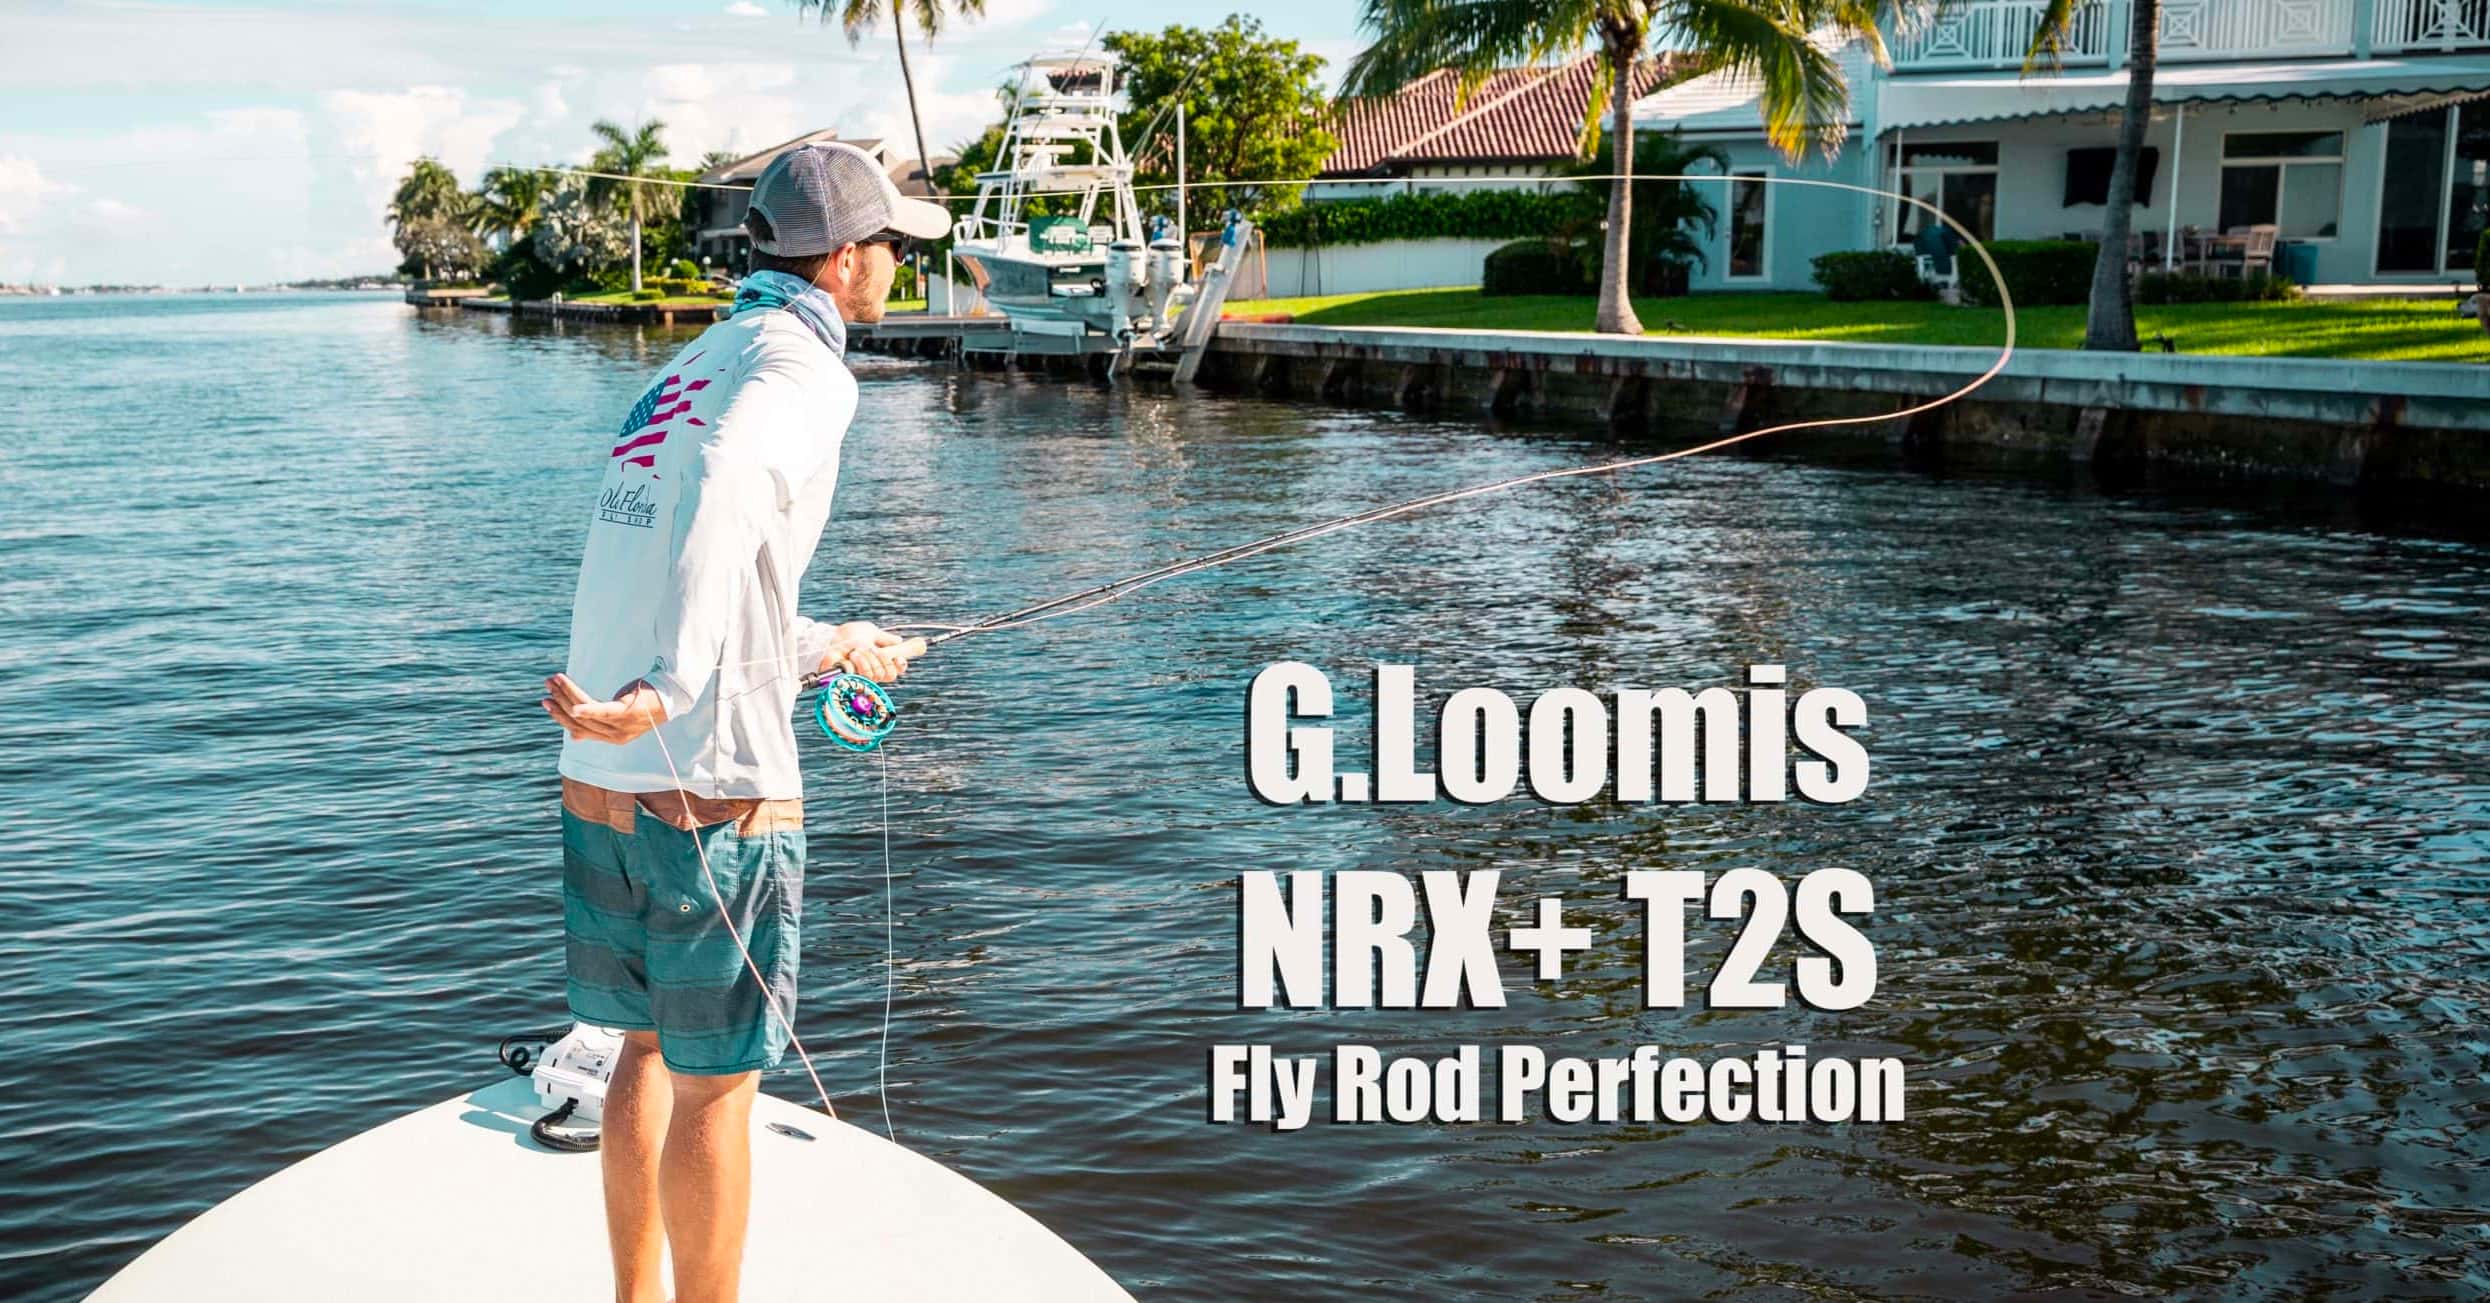 A Look at the New G.loomis NRX+ T2S, Fly Rod Perfection